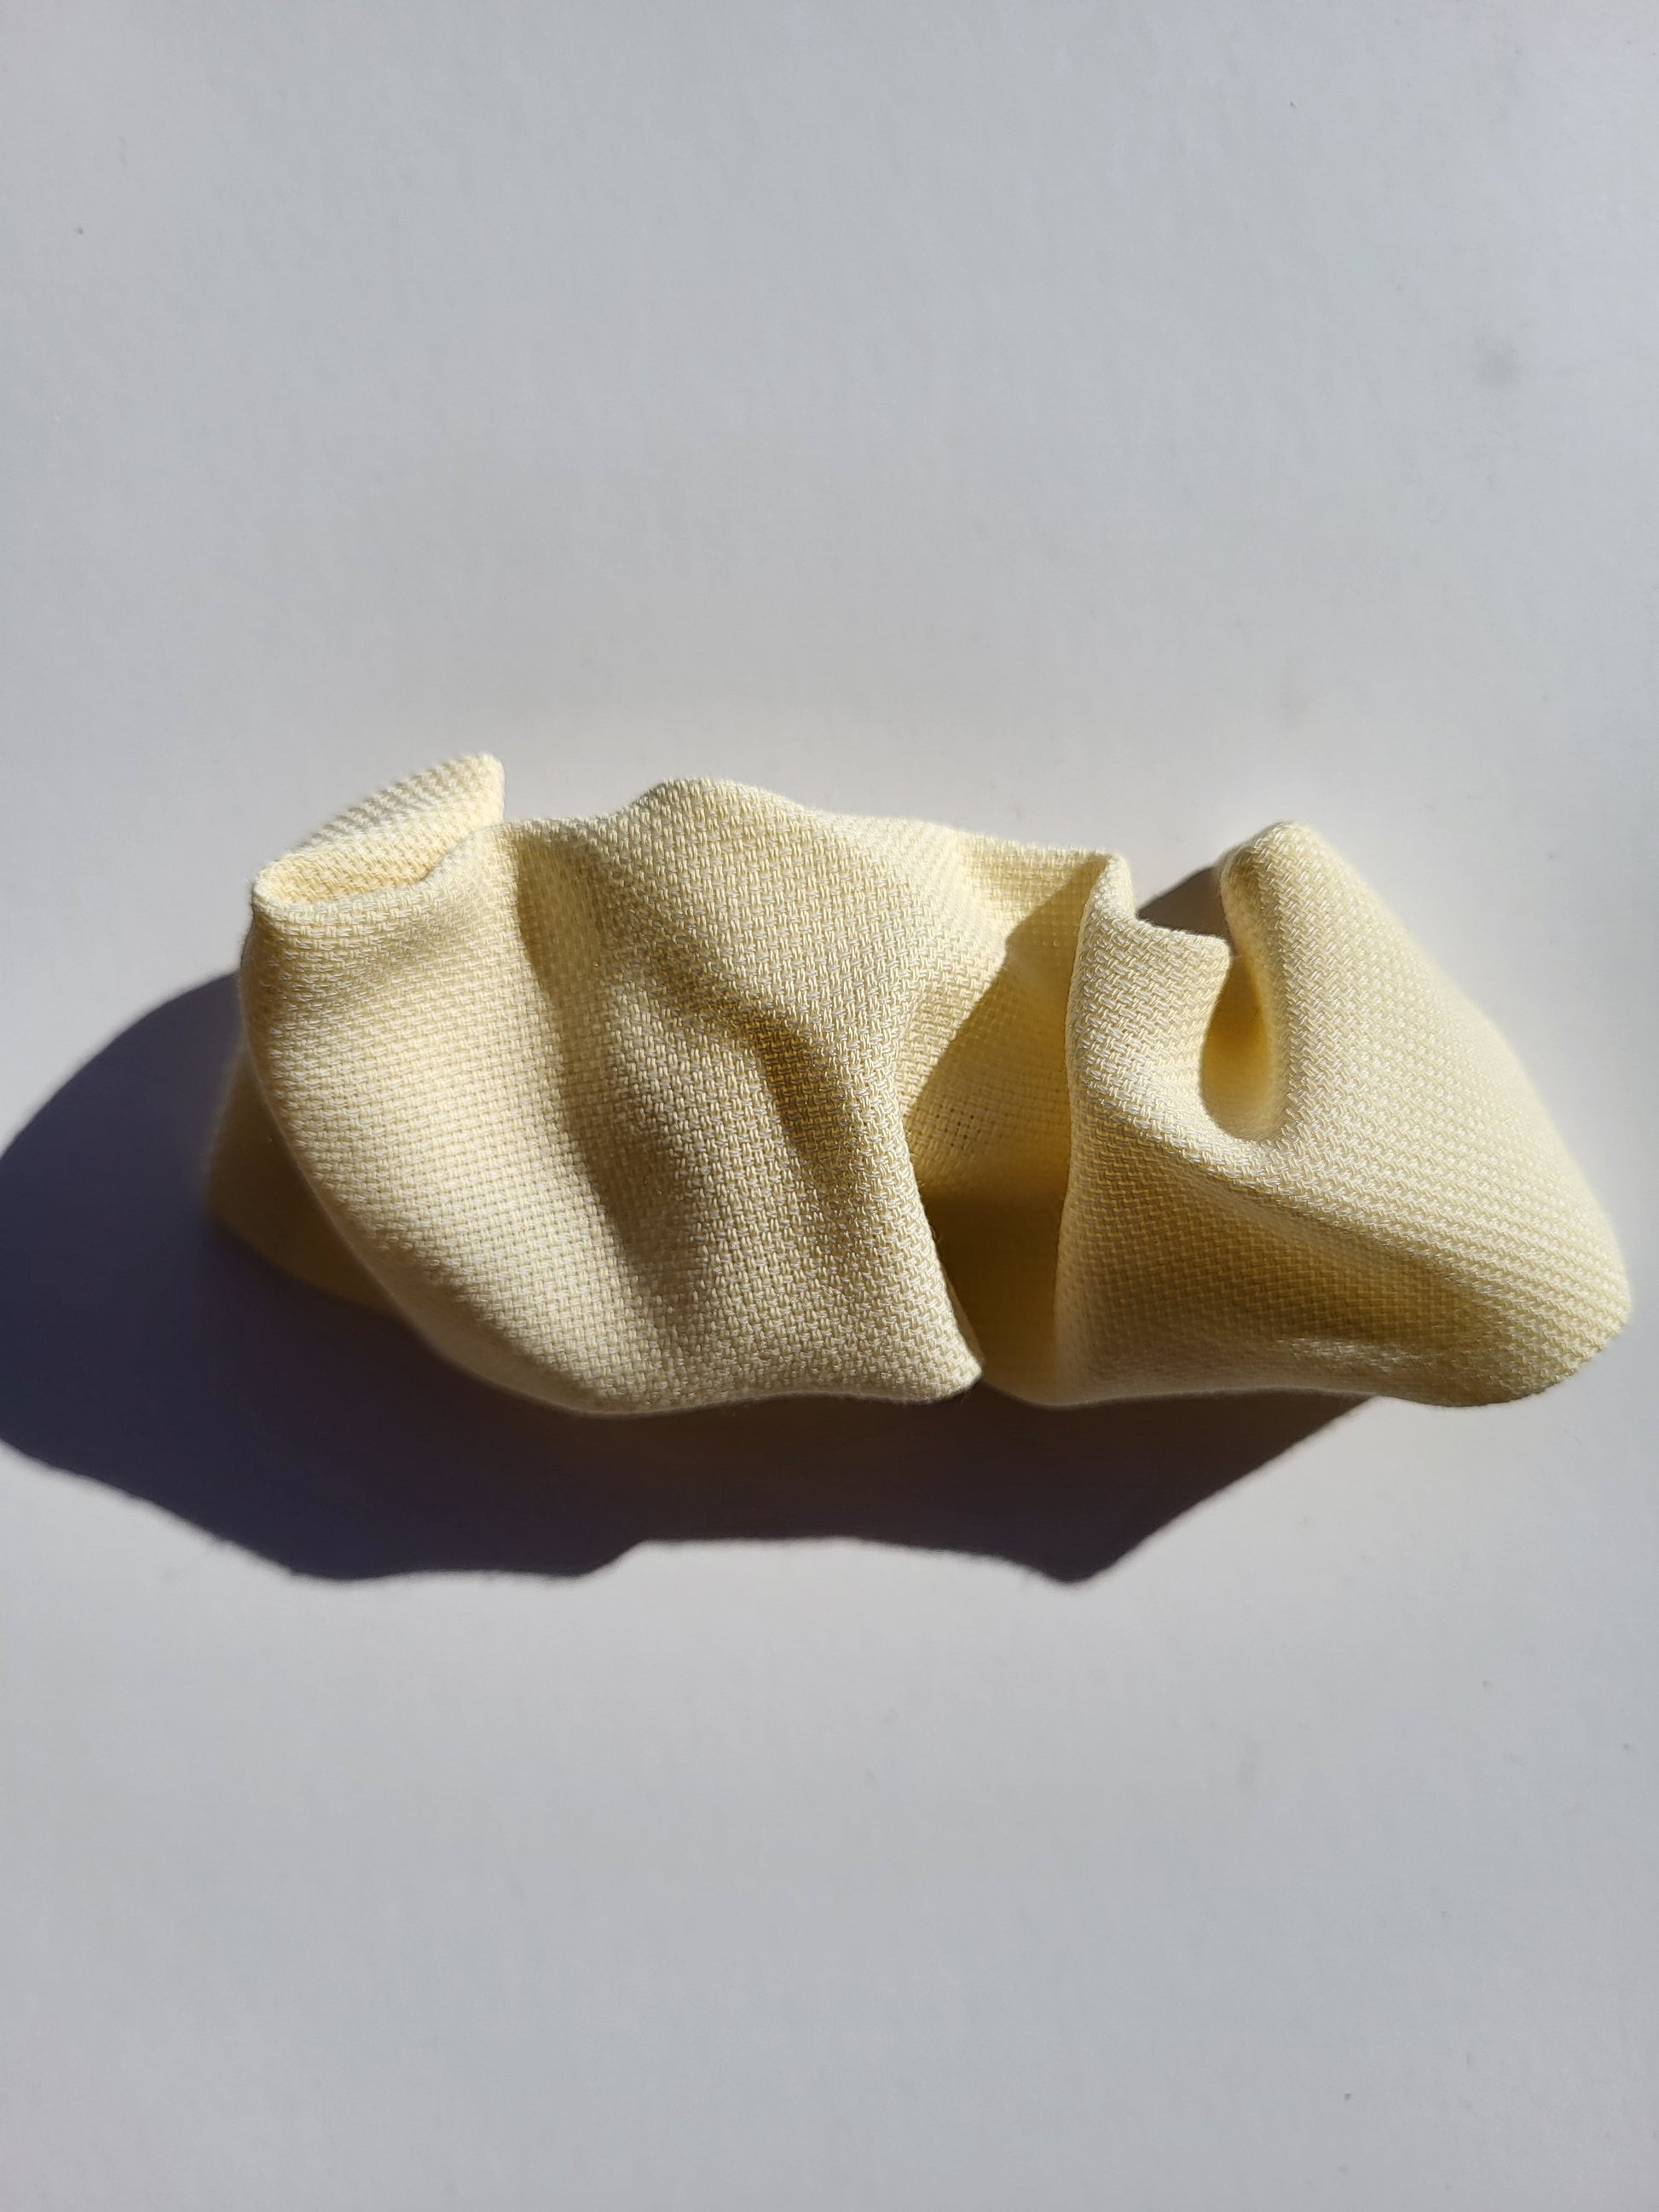 yellow hair clip on white table